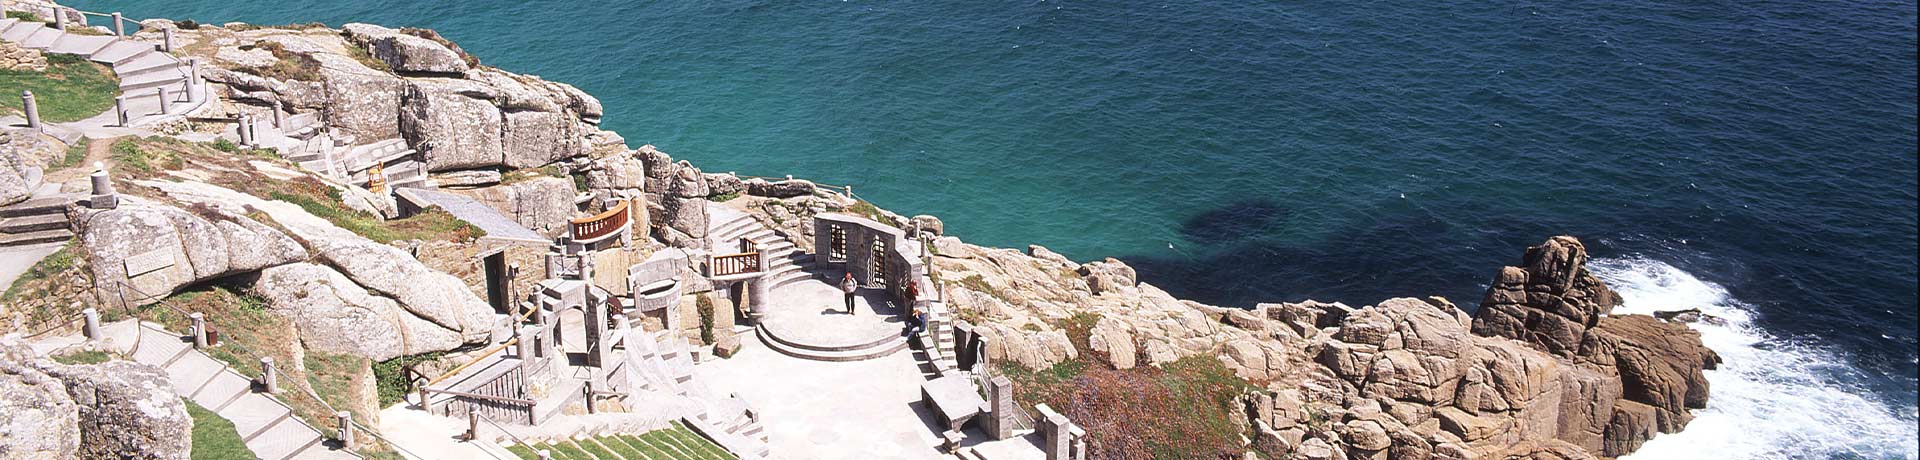 A guide to the Minack Theatre